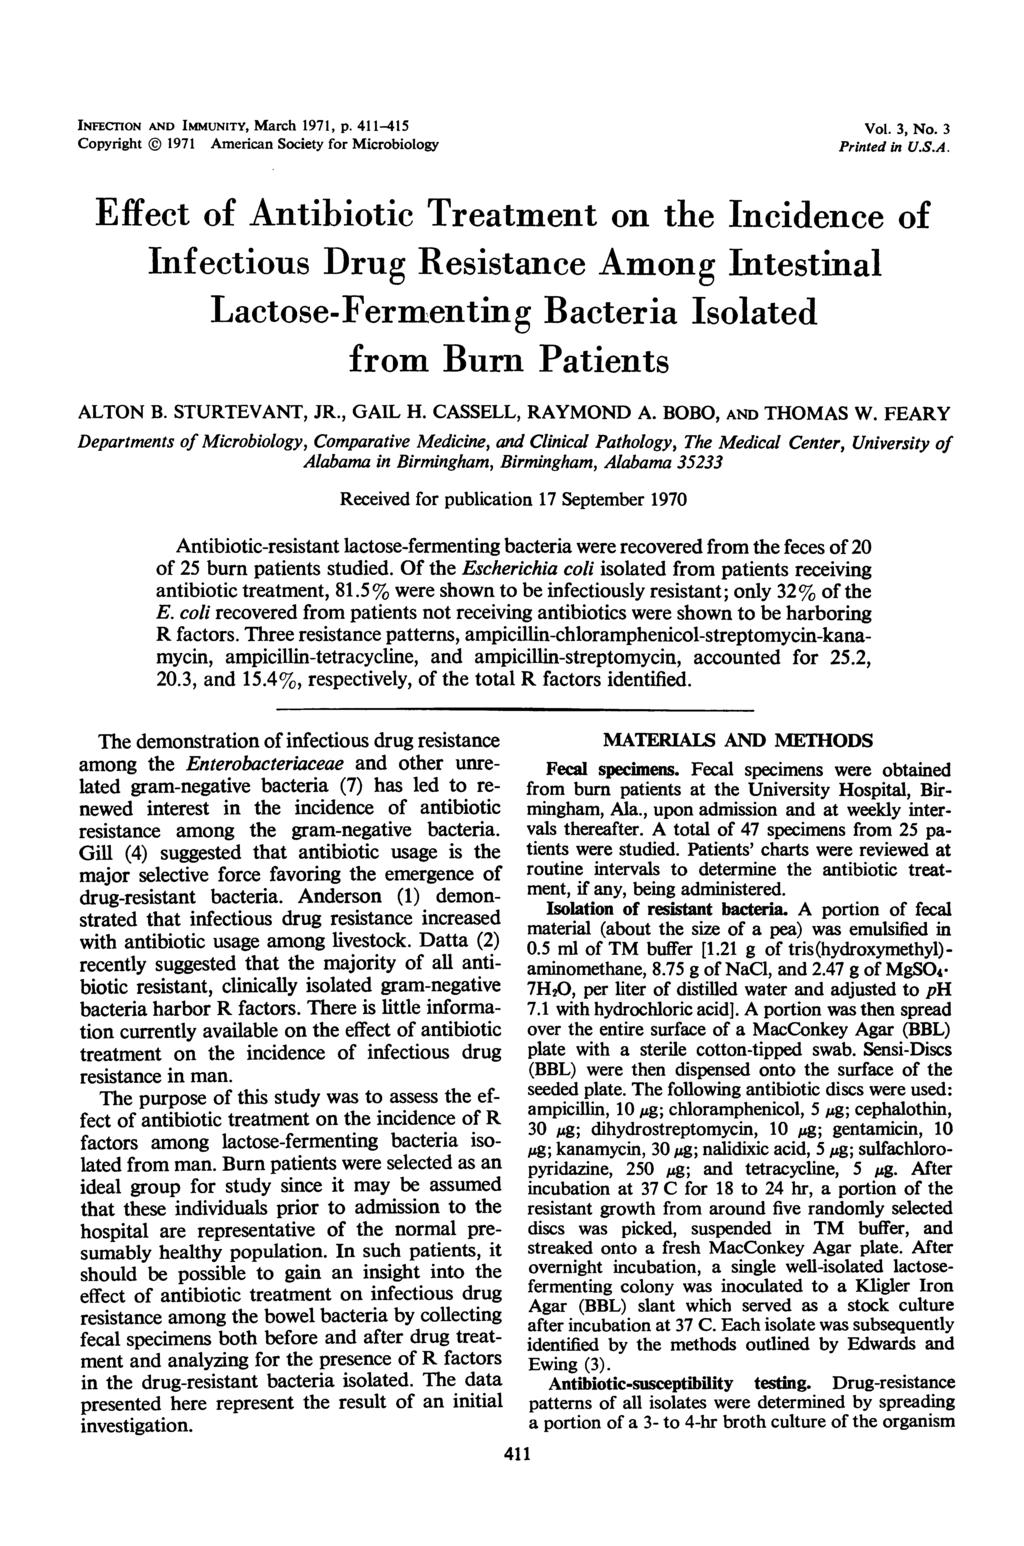 INFECTION AND IMMUNITY, March 1971, p. 411-415 Copyright 1971 American Society for Microbiology Vol. 3, No. 3 Printed in U.S.A. Effect of Antibiotic Treatment on the Incidence of Infectious Drug Resistance Among Intestinal Lactose-Fermenting Bacteria Isolated from Burni Patients ALTON B.